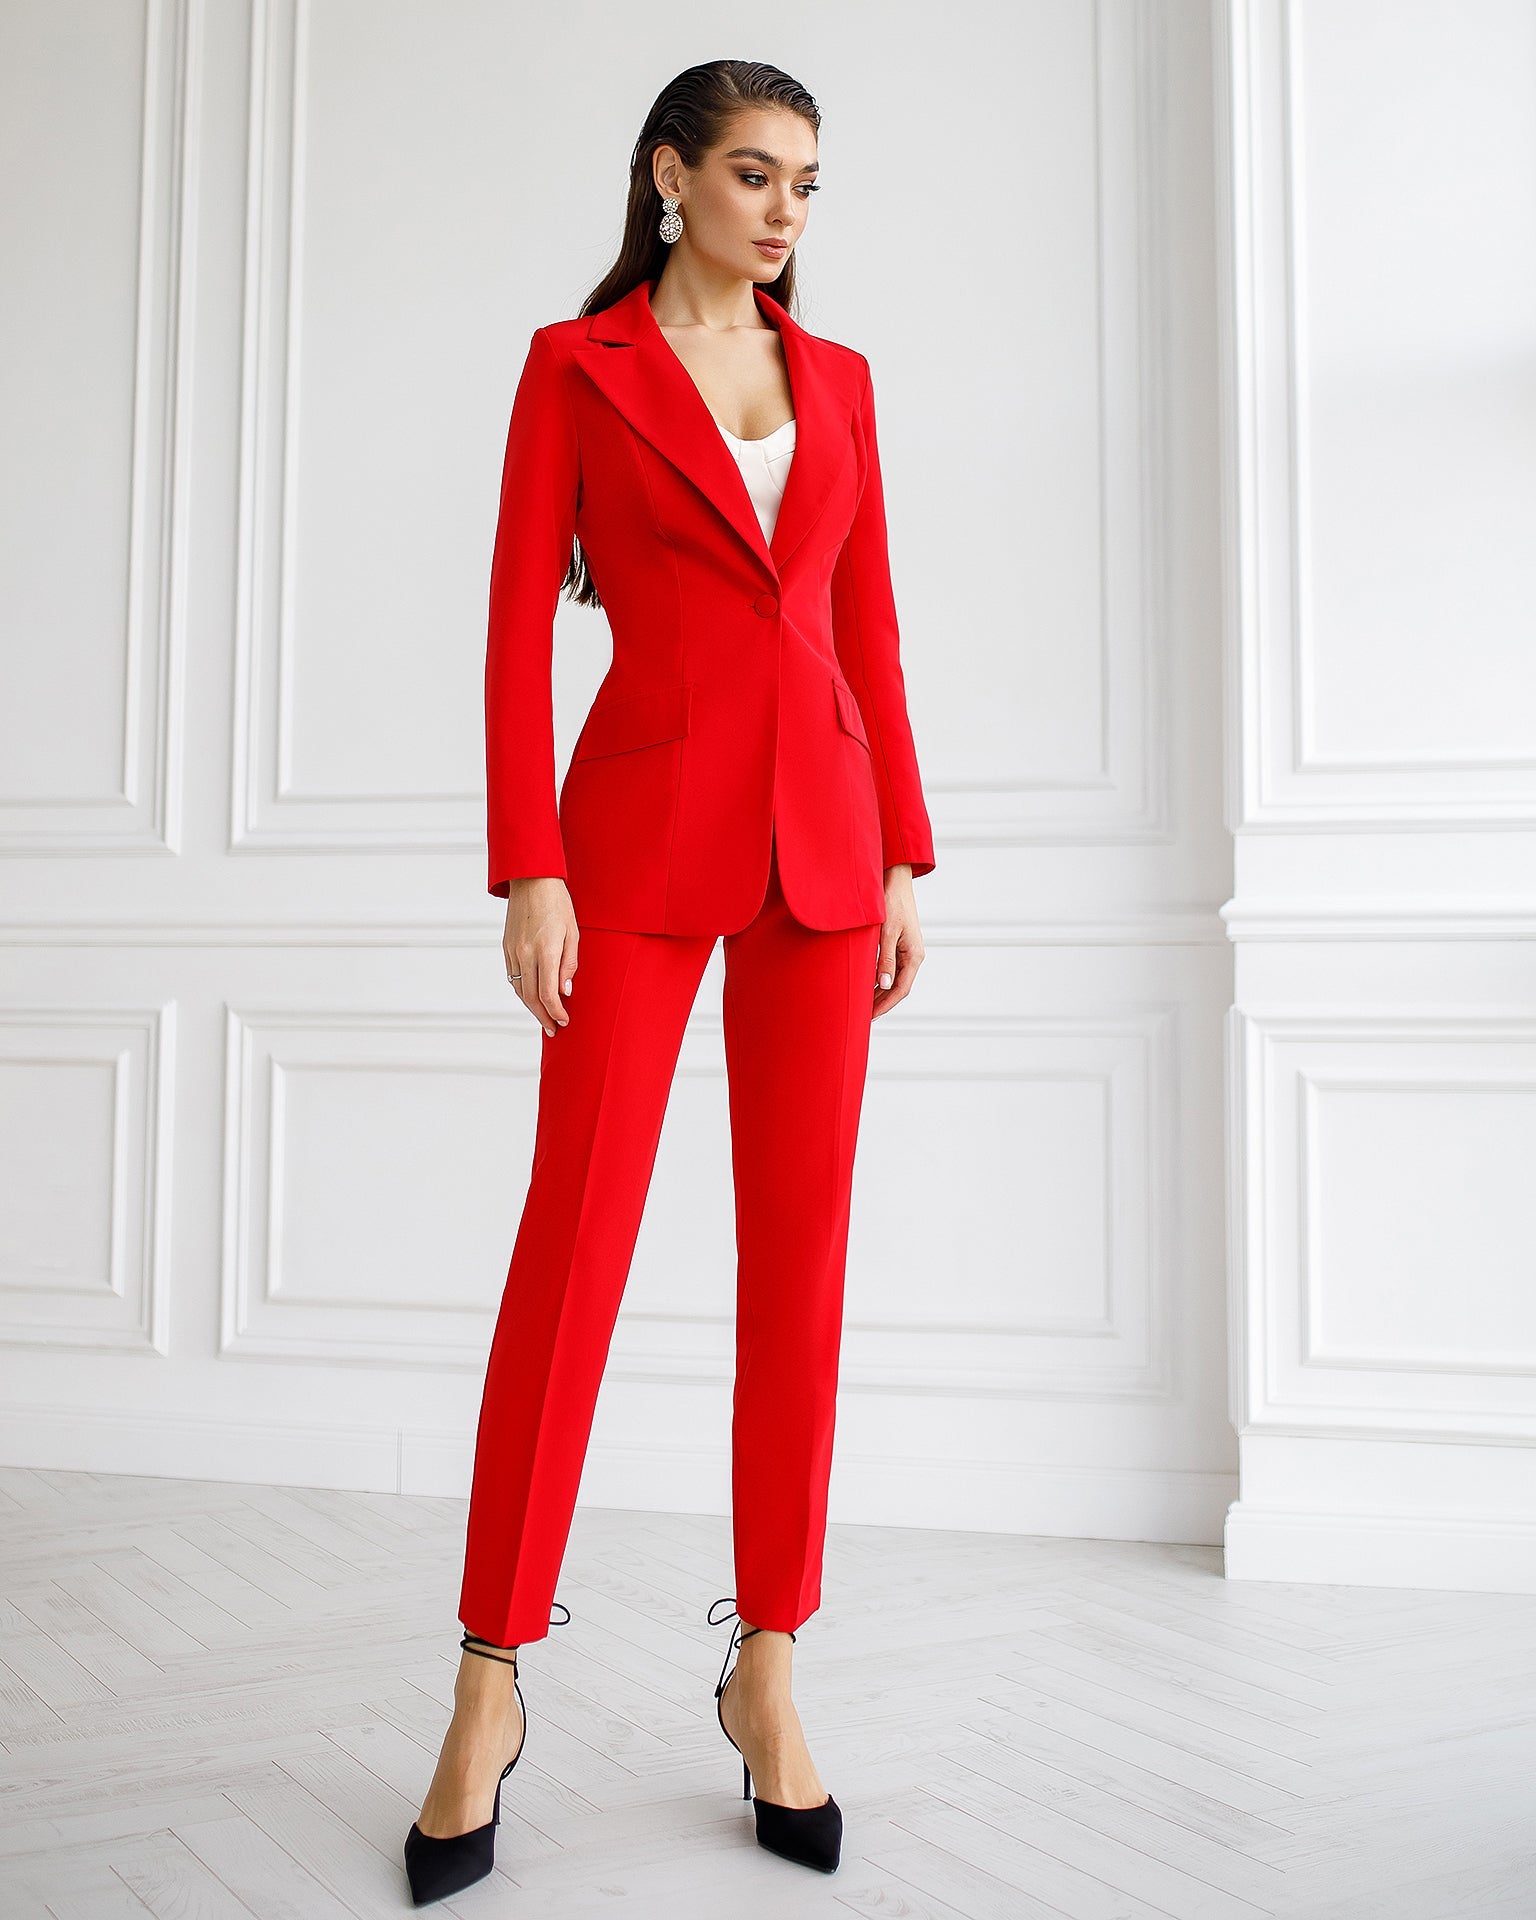 trinarosh Red Single-Breasted Suit 2-Piece